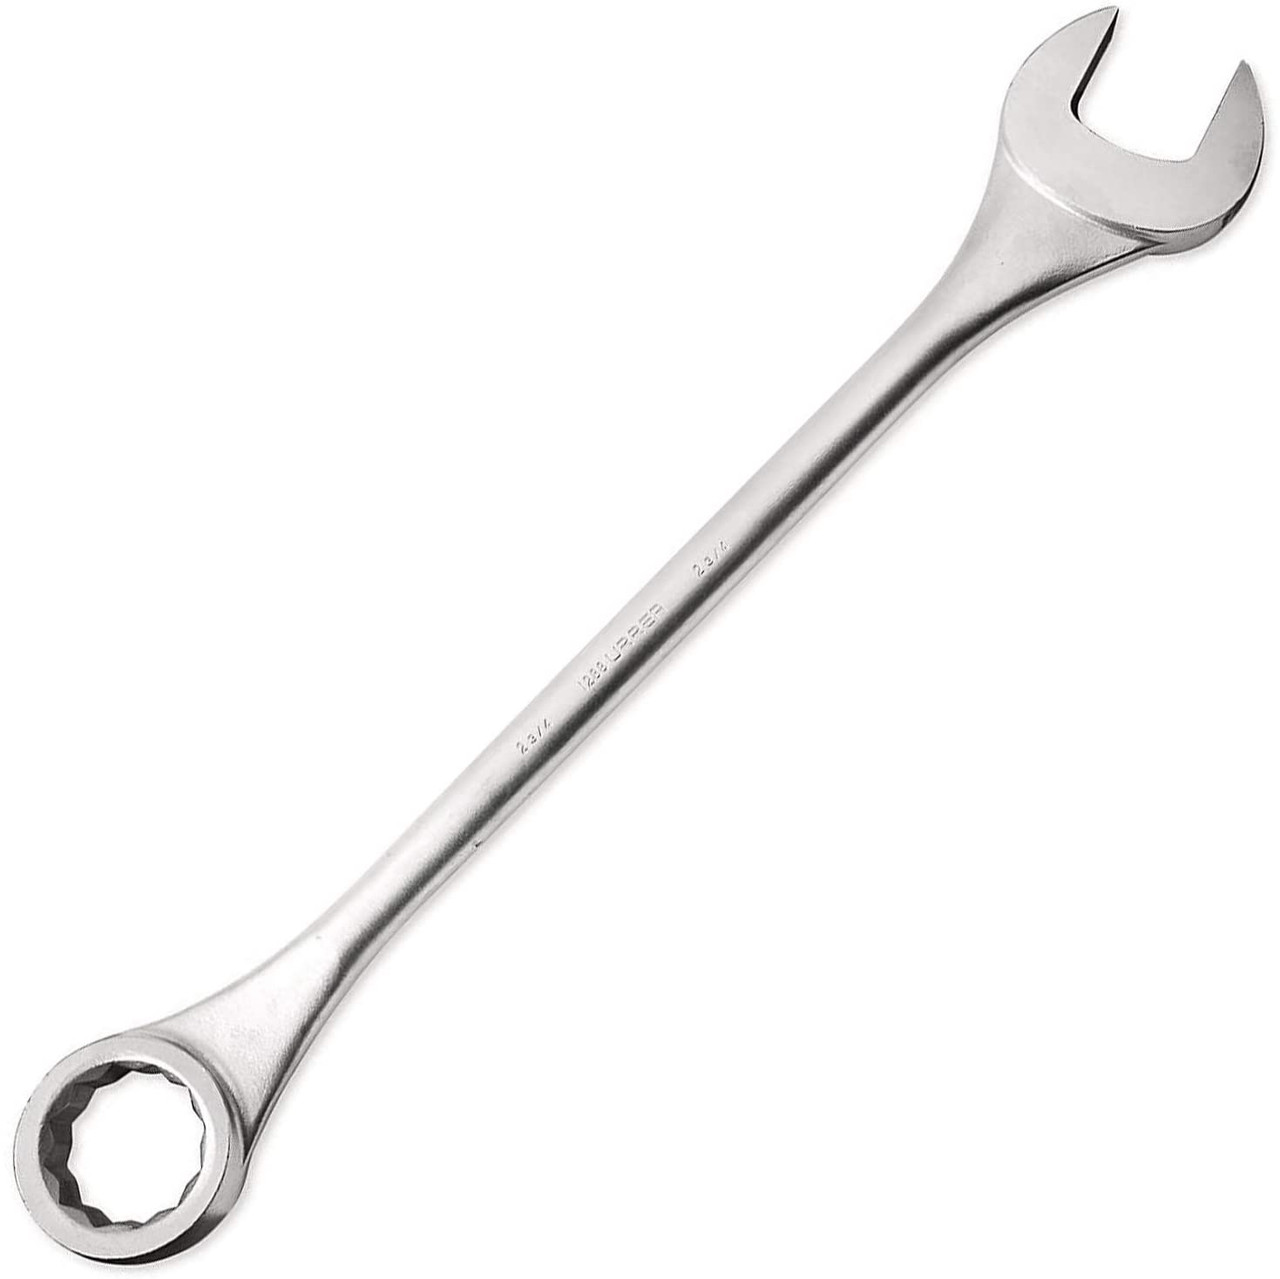 Satin finish combination wrench, Size: 2-1/8, 12 point, Tool Length: 30"